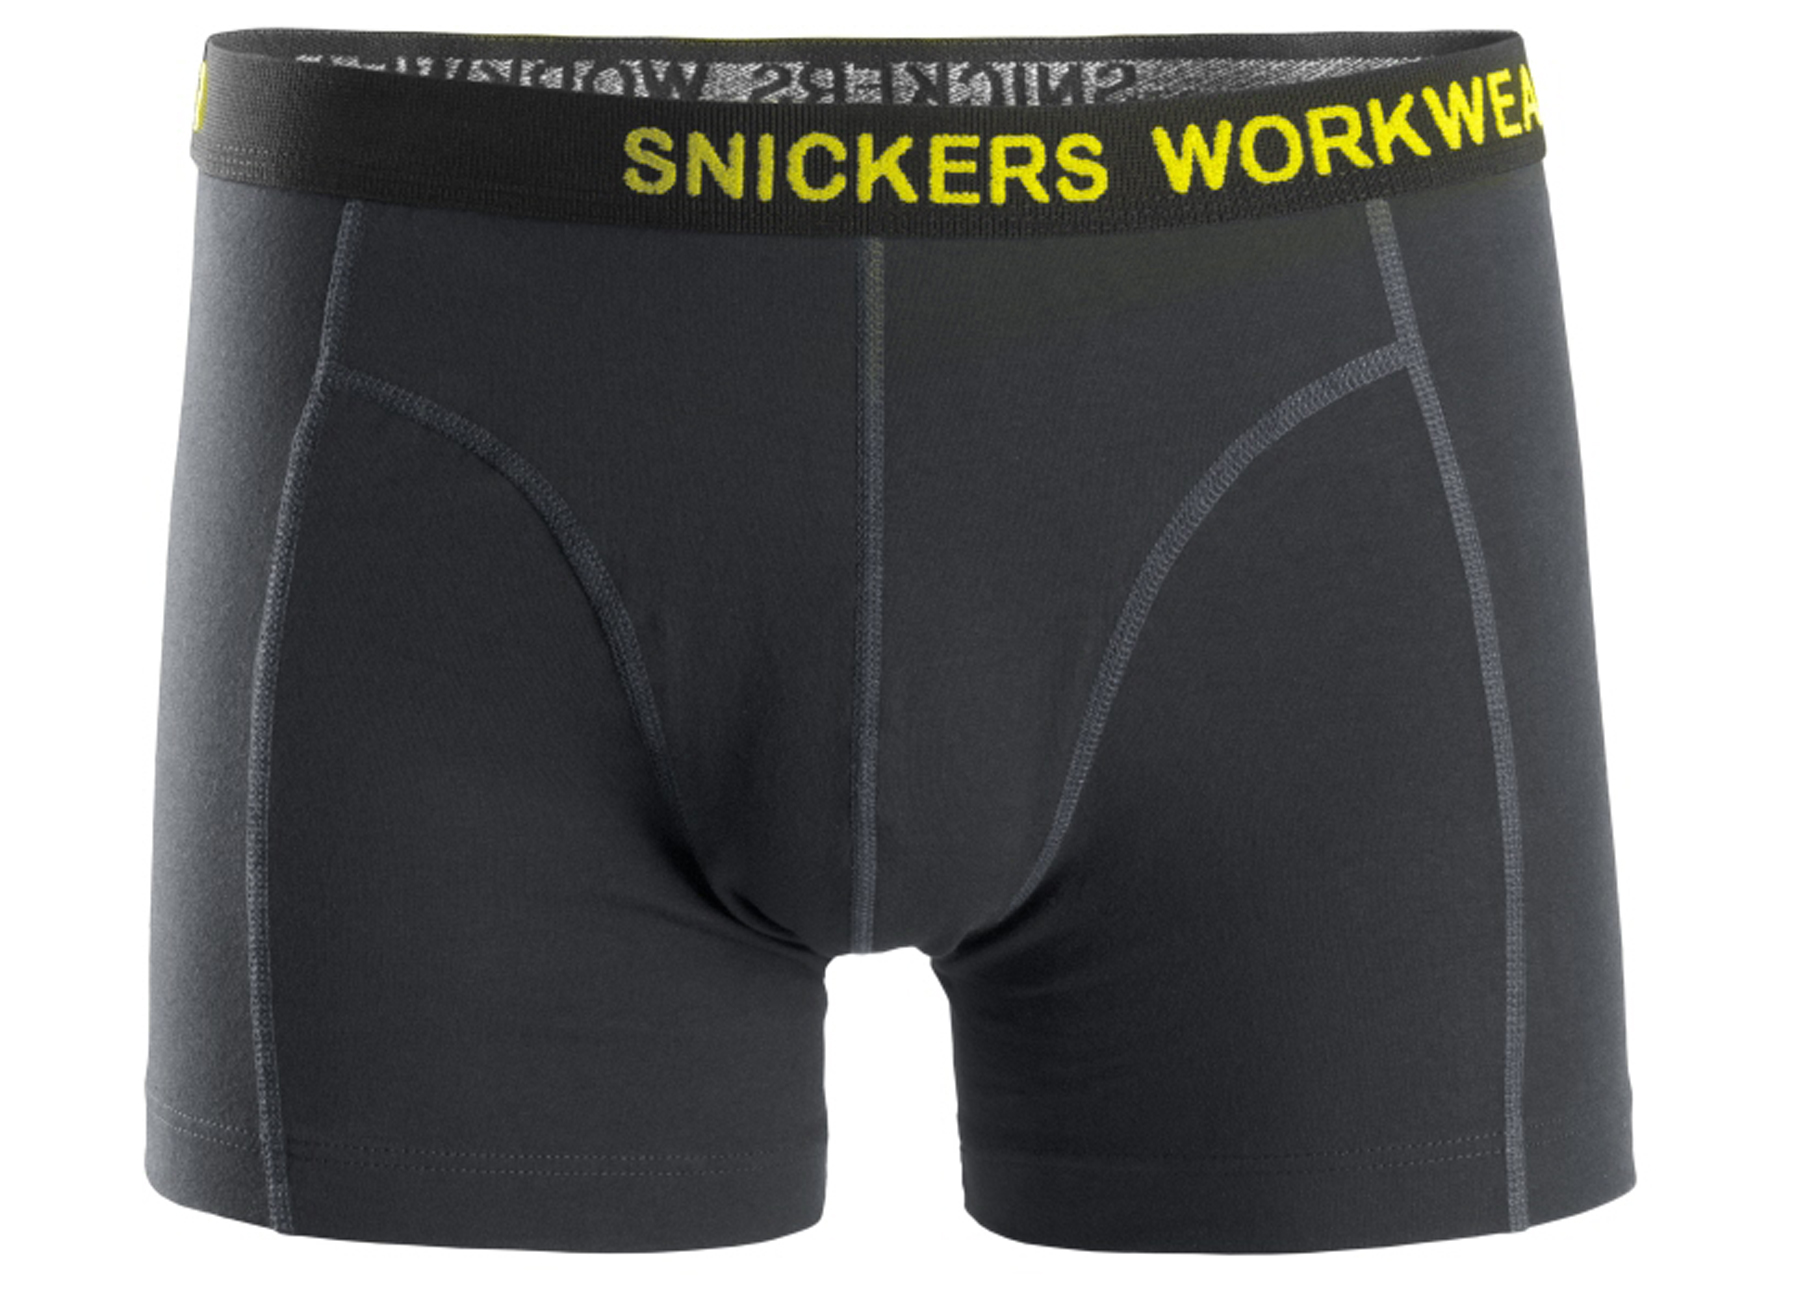 SNICKERS 2-PACK STRETCH SHORTS GREY -  M: M